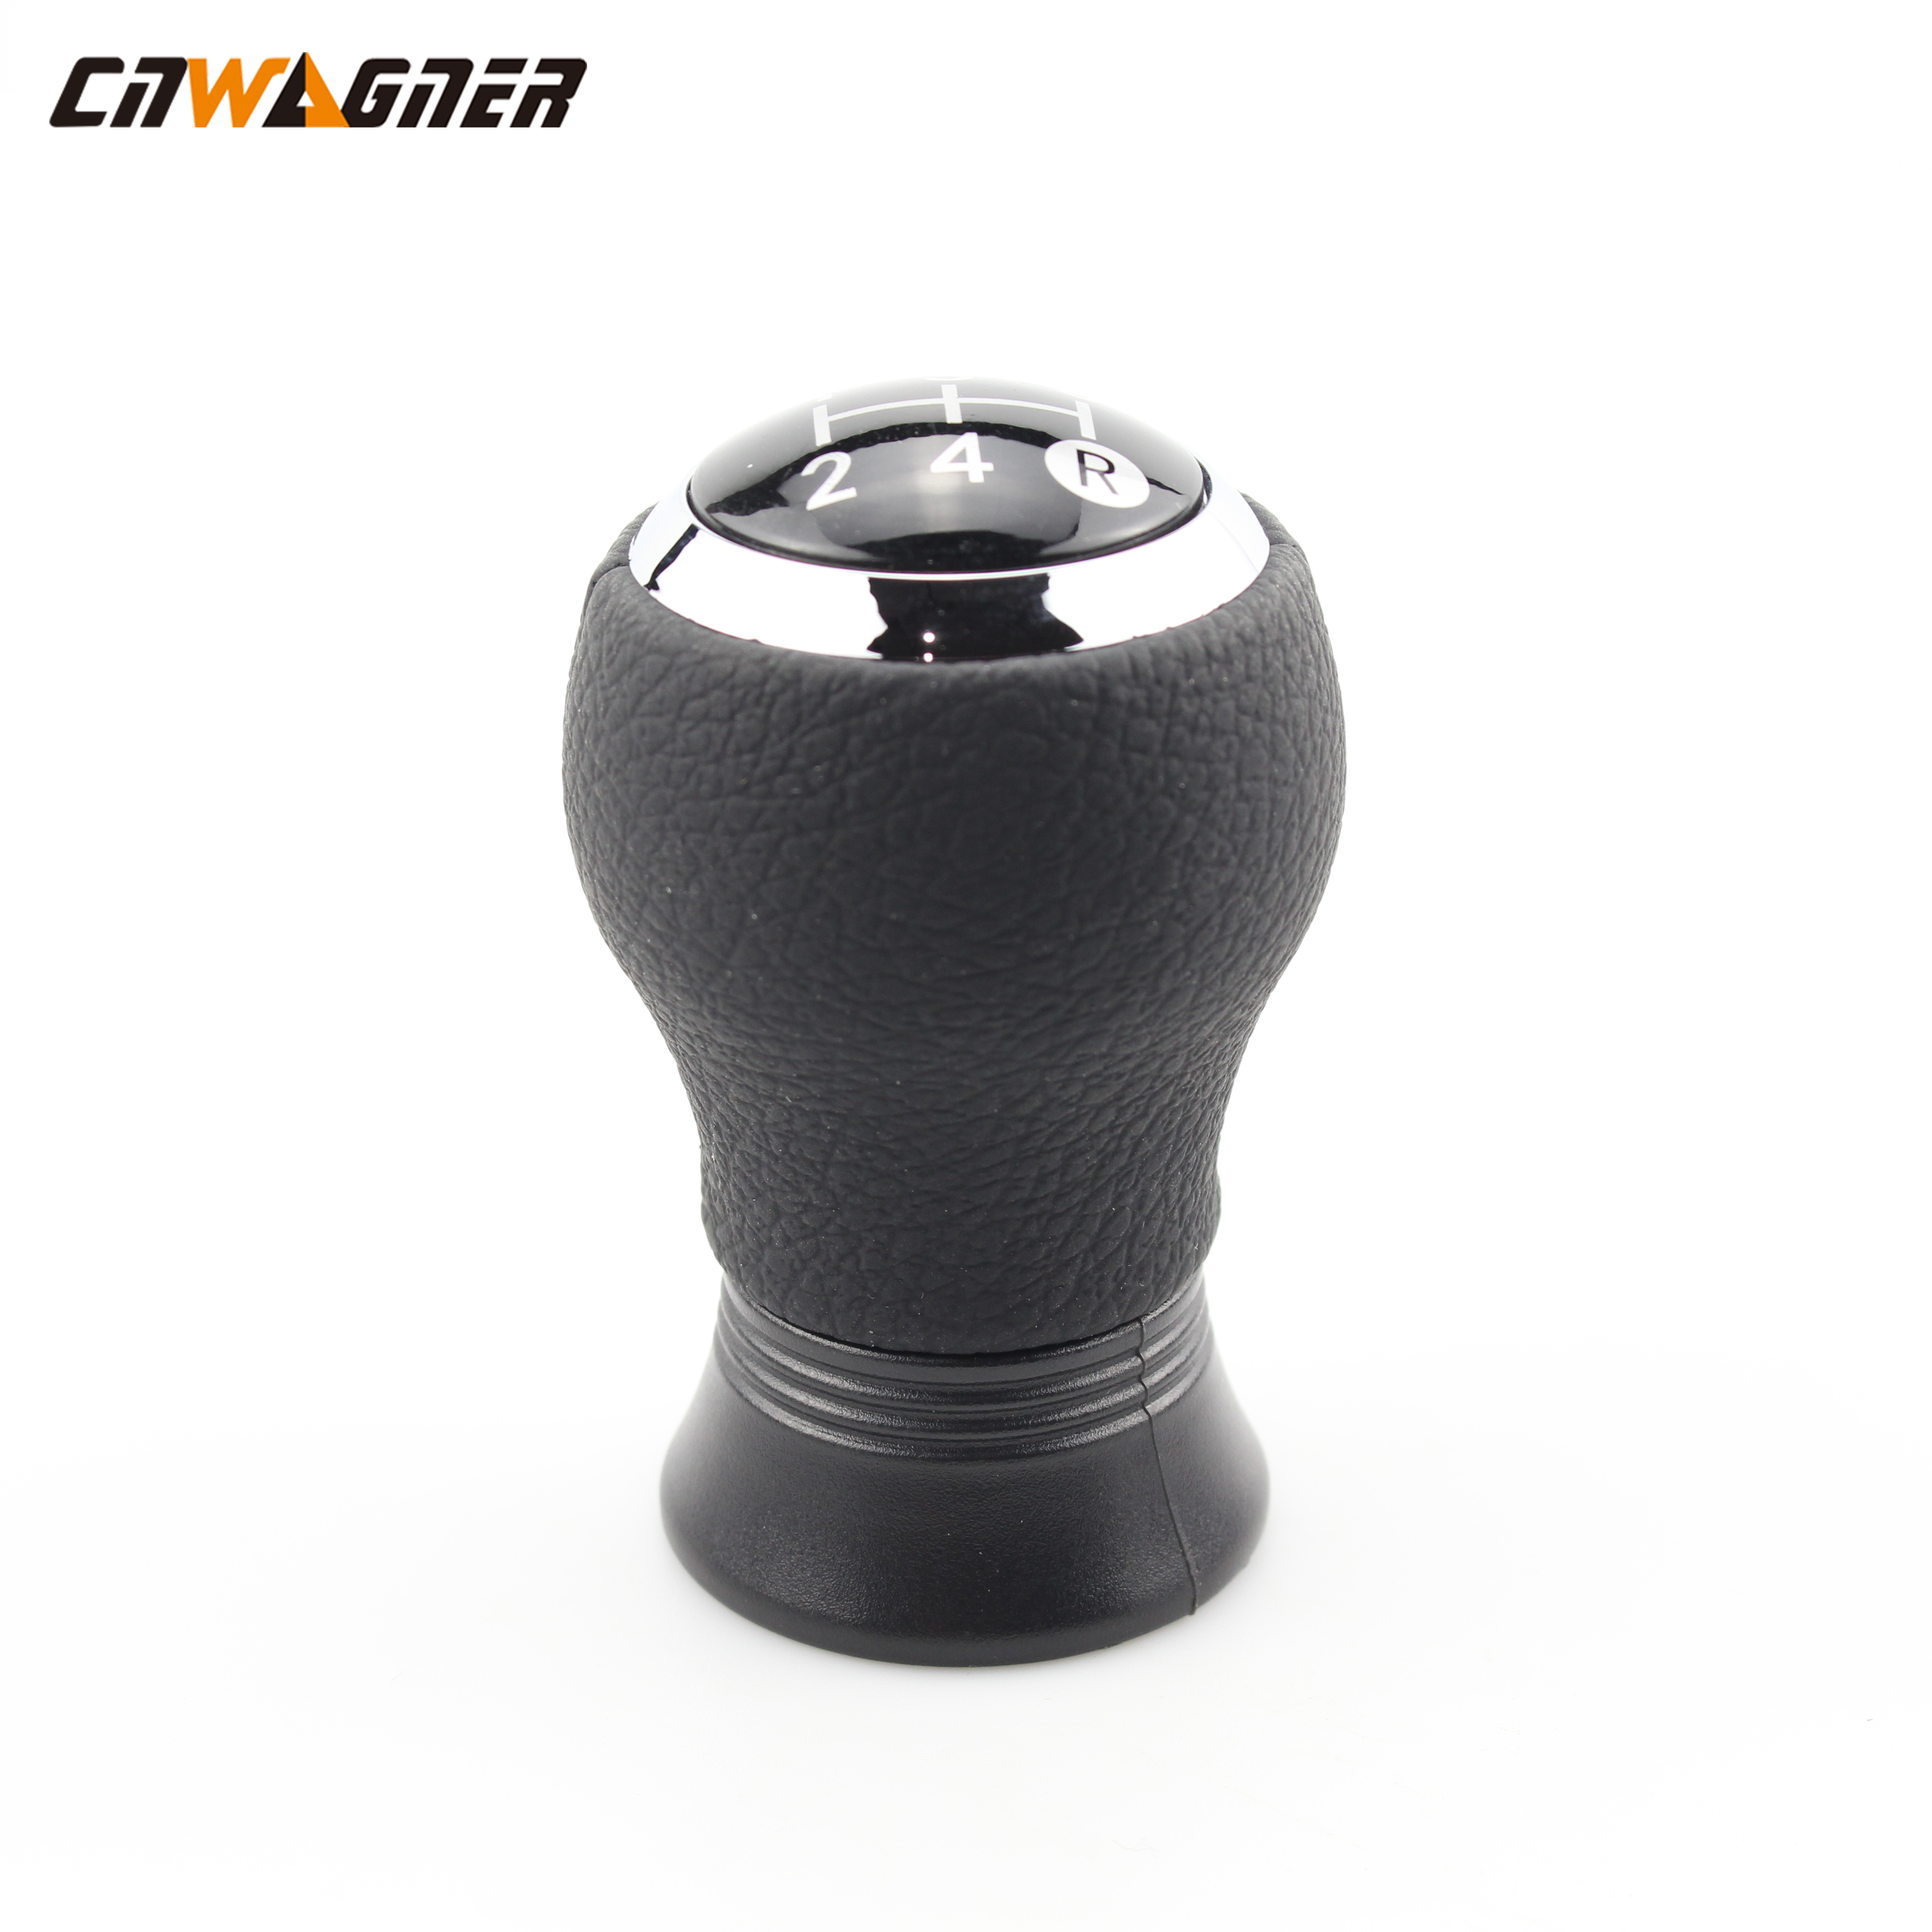 Best-Selling Auto Parts GearShift Manual Racing Steering Gear Knob para Toyota Auris 2007-2008